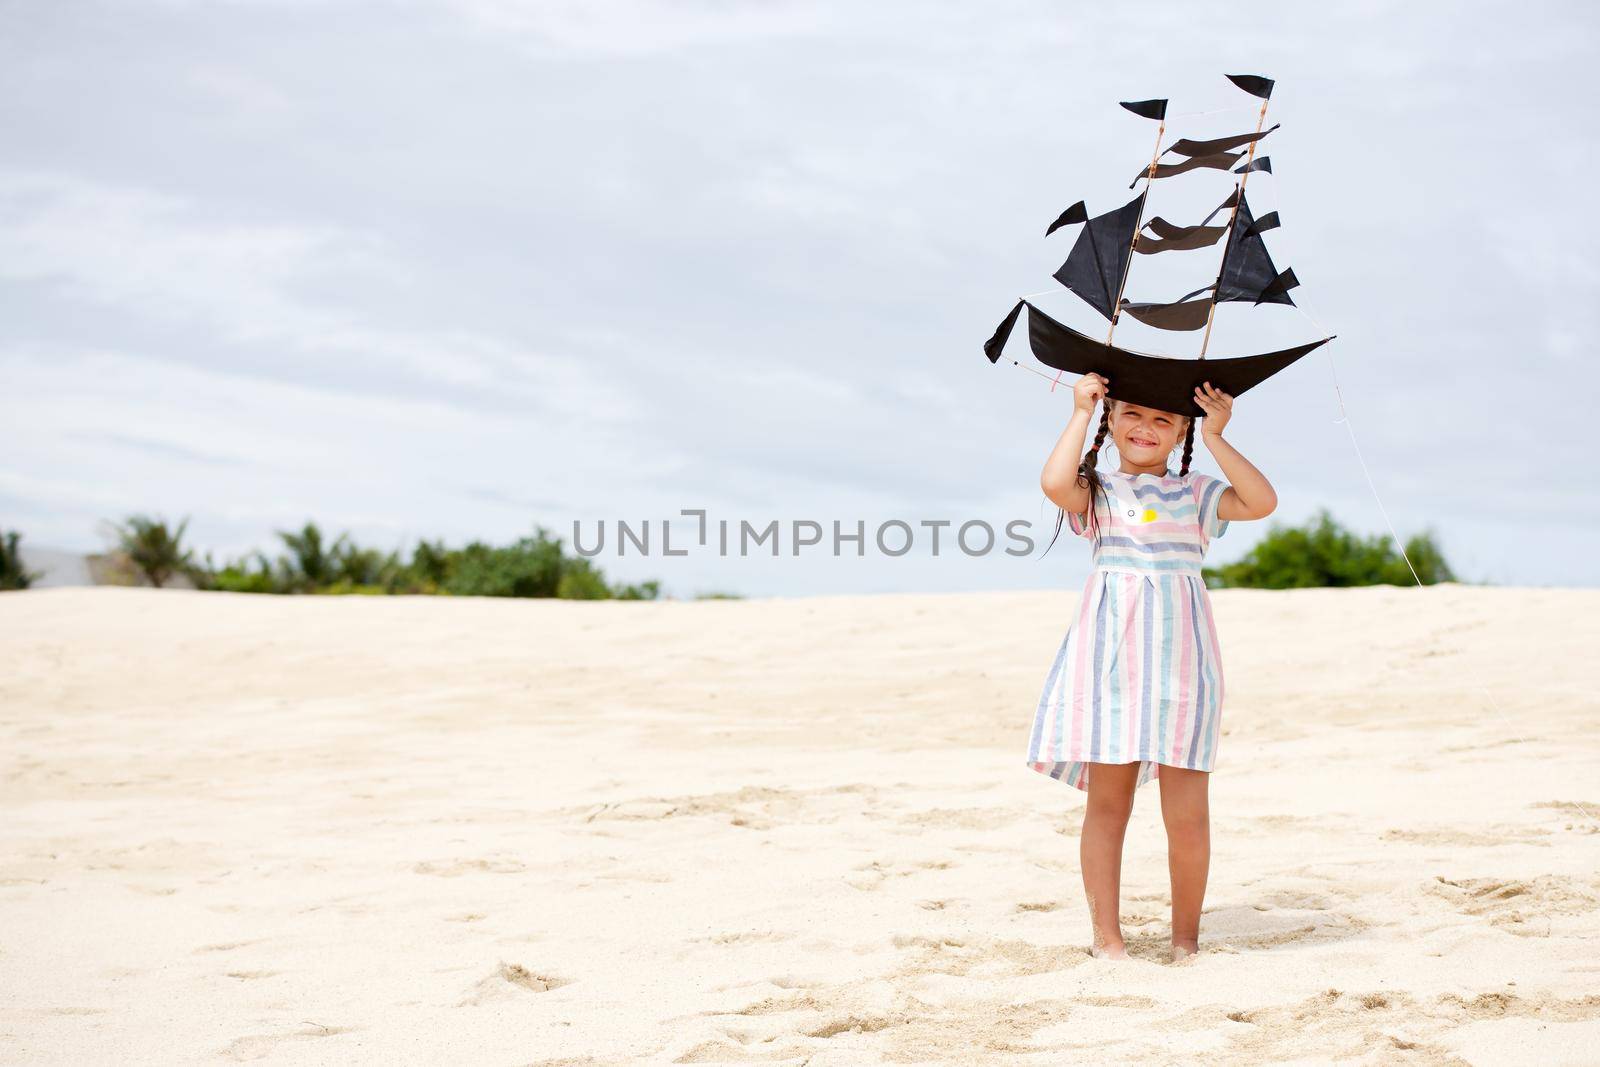 Cute little girl playing on the beach flying ship kite. Child enjoying summer family vacation at the sea.